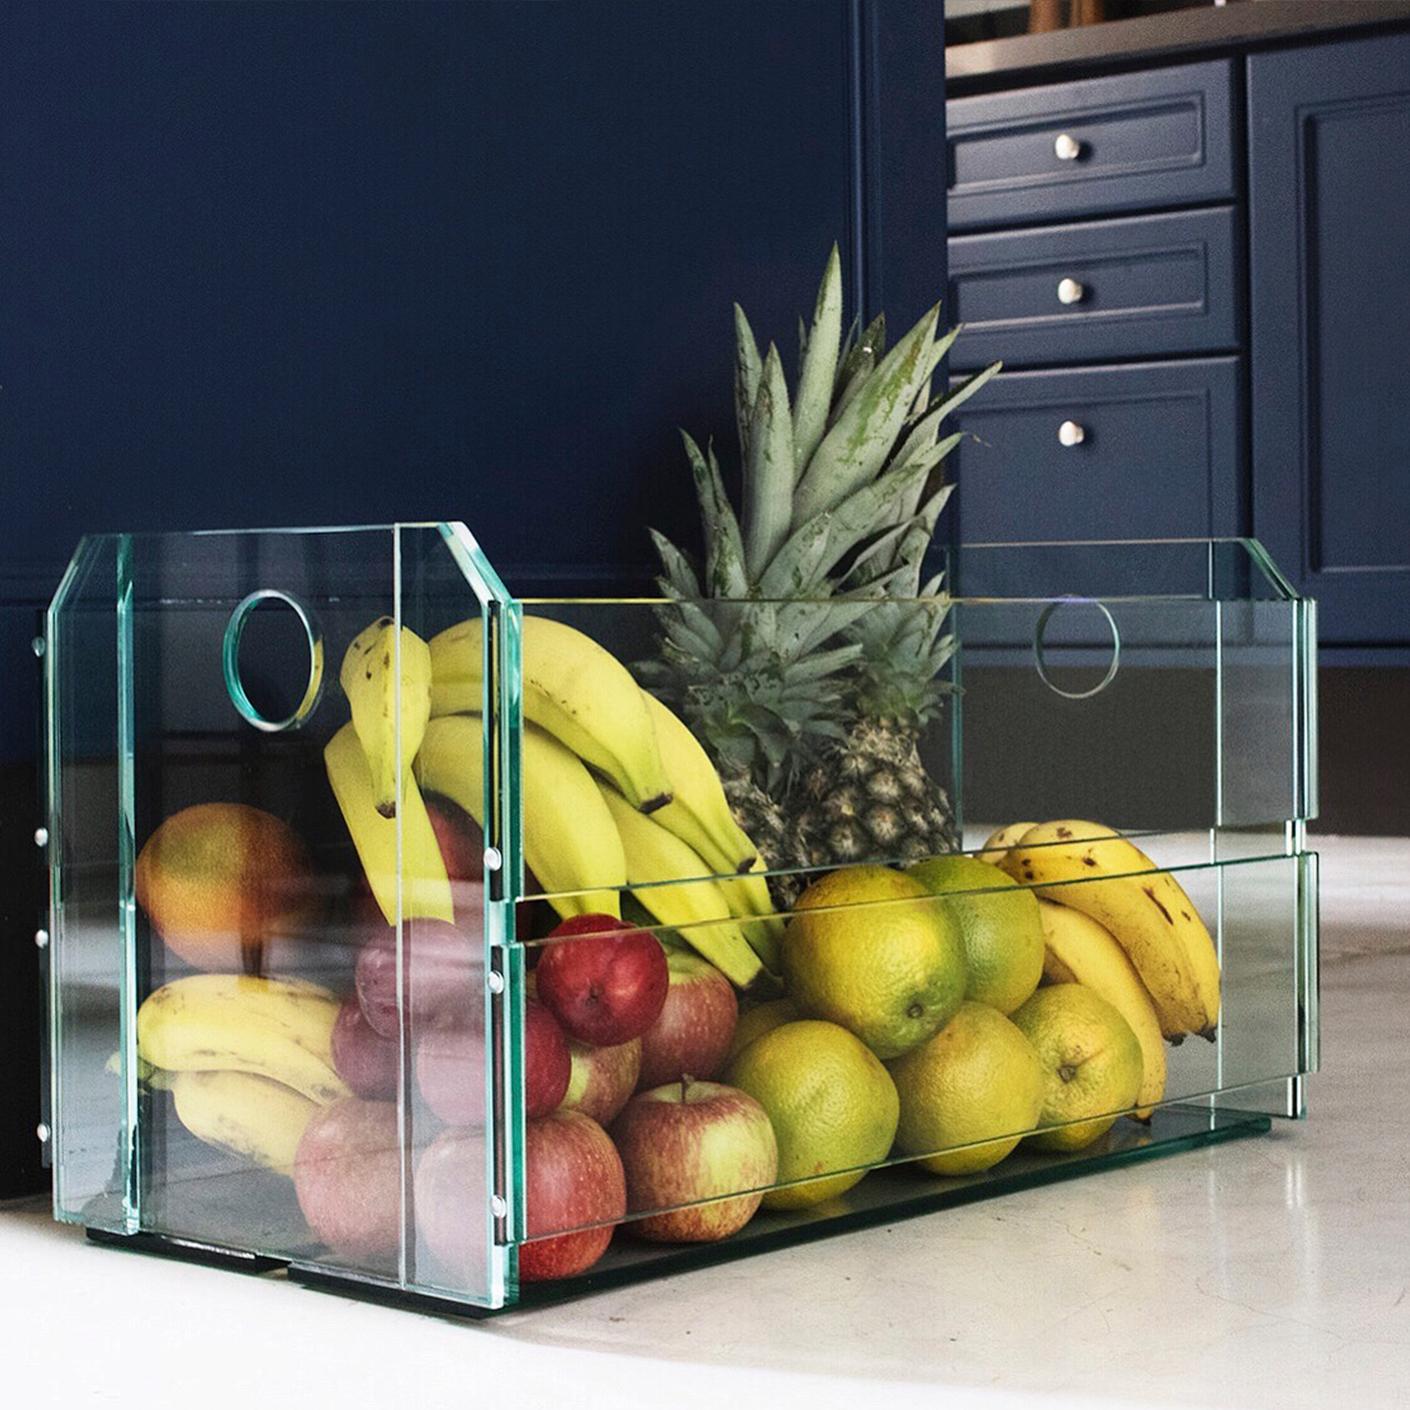 To perpetuate the memorable wooden boxes at fairs in Brazil, the architect and designer Tiago Curioni, a Brazilian based in Portugal, recreated the glass boxes, in a limited series of 30 units.

Named as Quitandeira, it has a system of glass